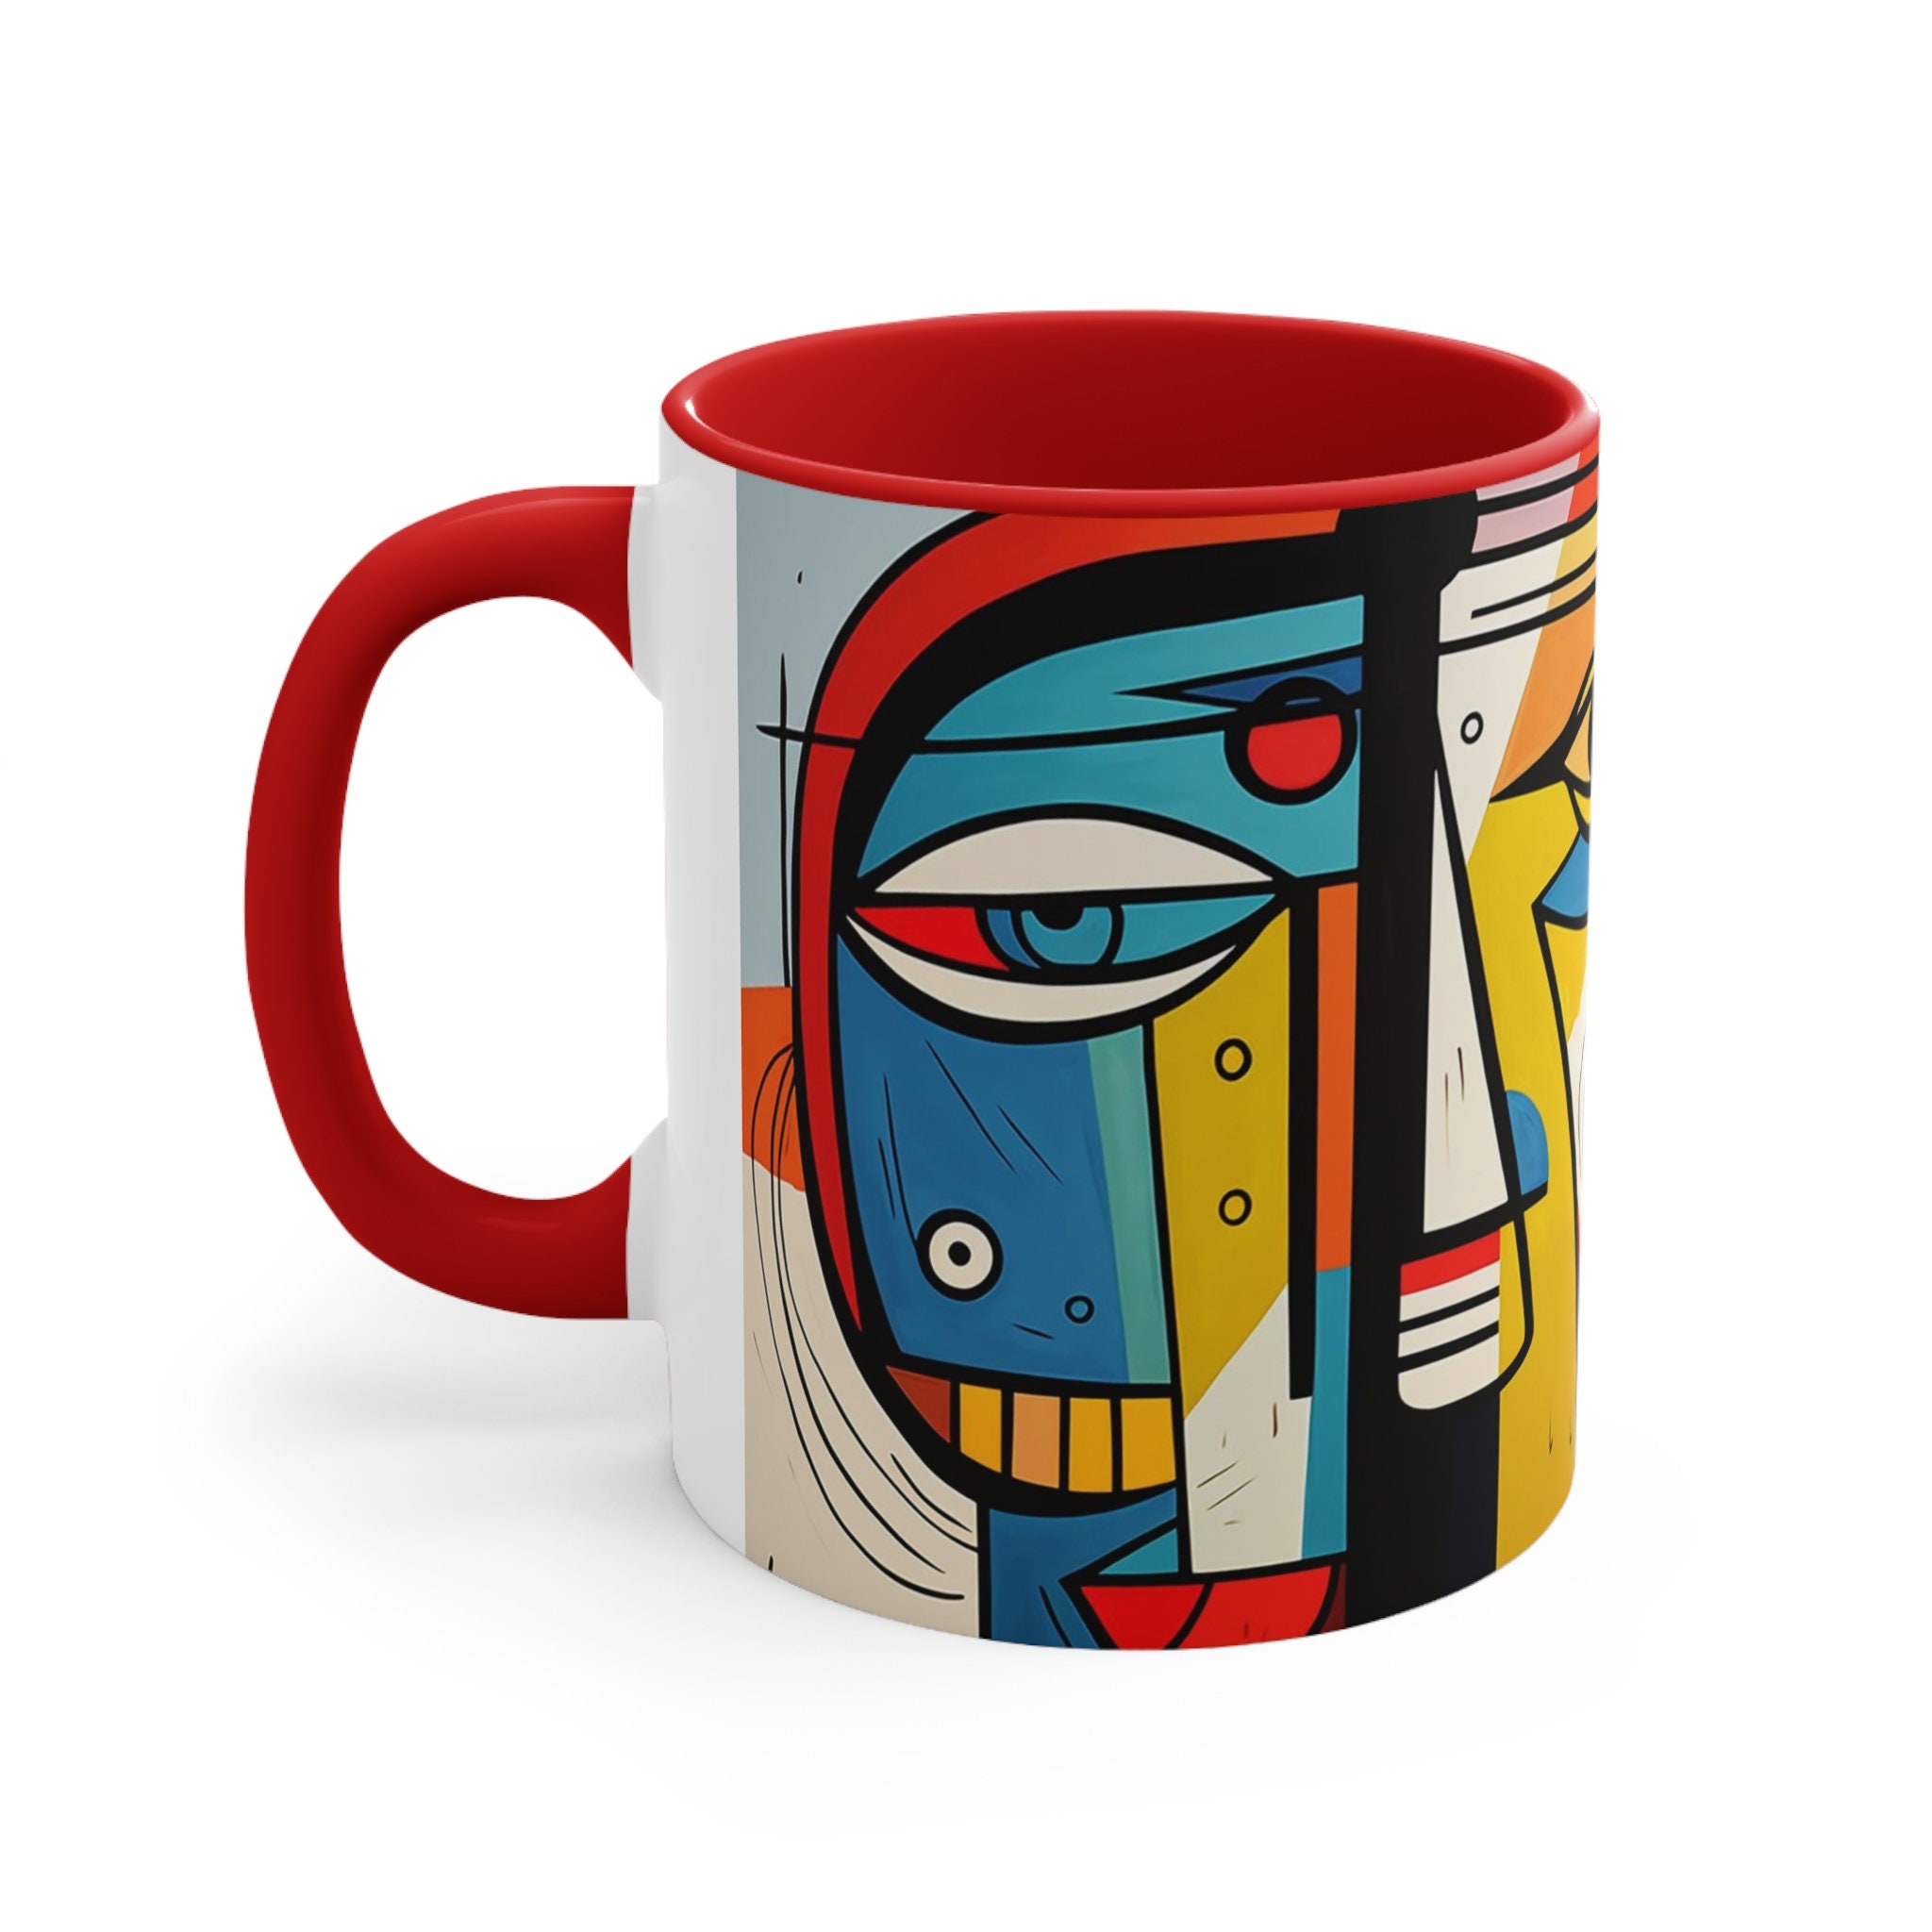 Abstract Art Travel Mug - Joy in the Works